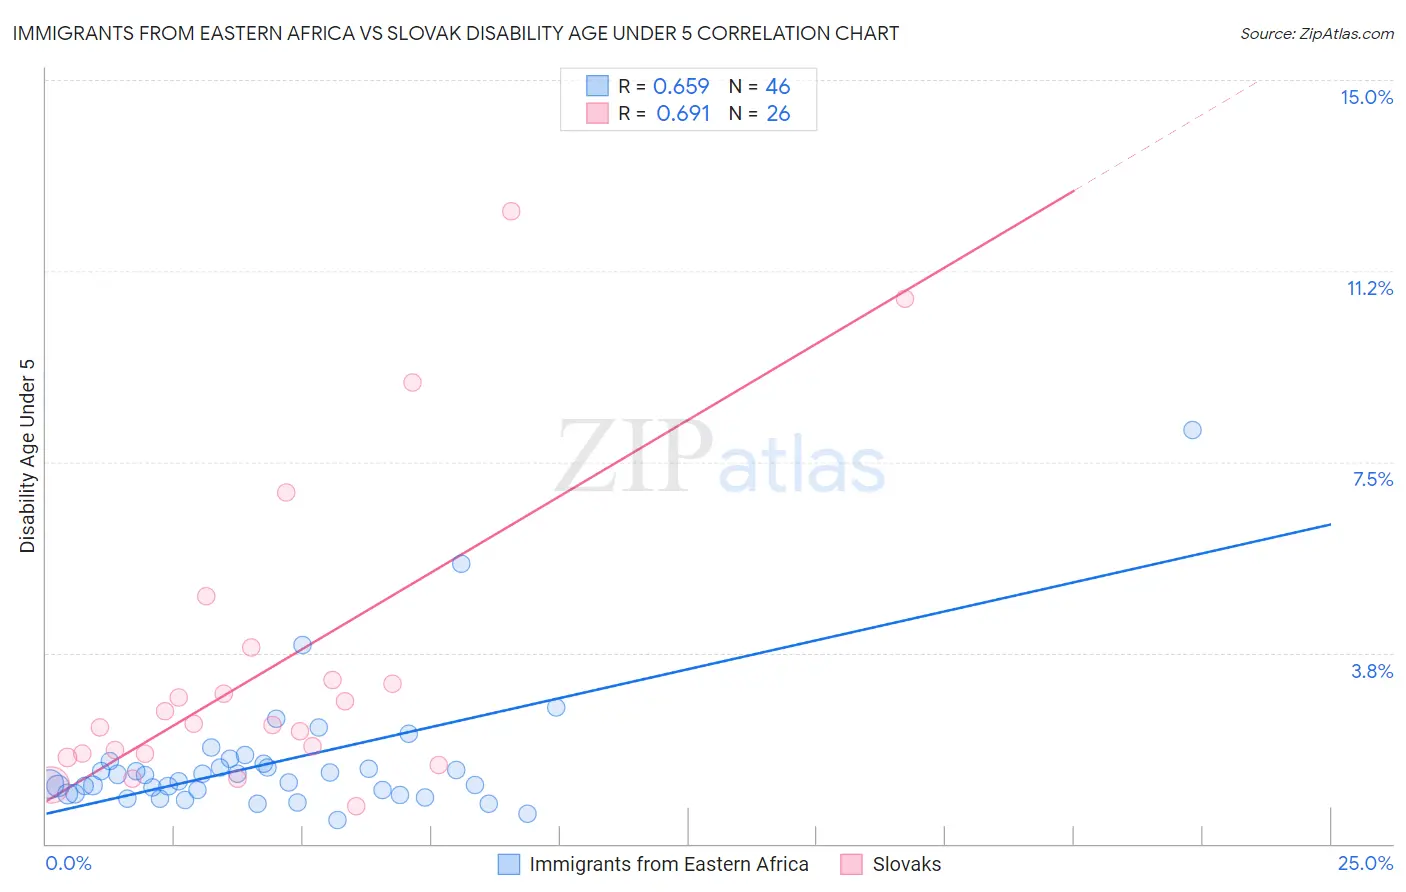 Immigrants from Eastern Africa vs Slovak Disability Age Under 5